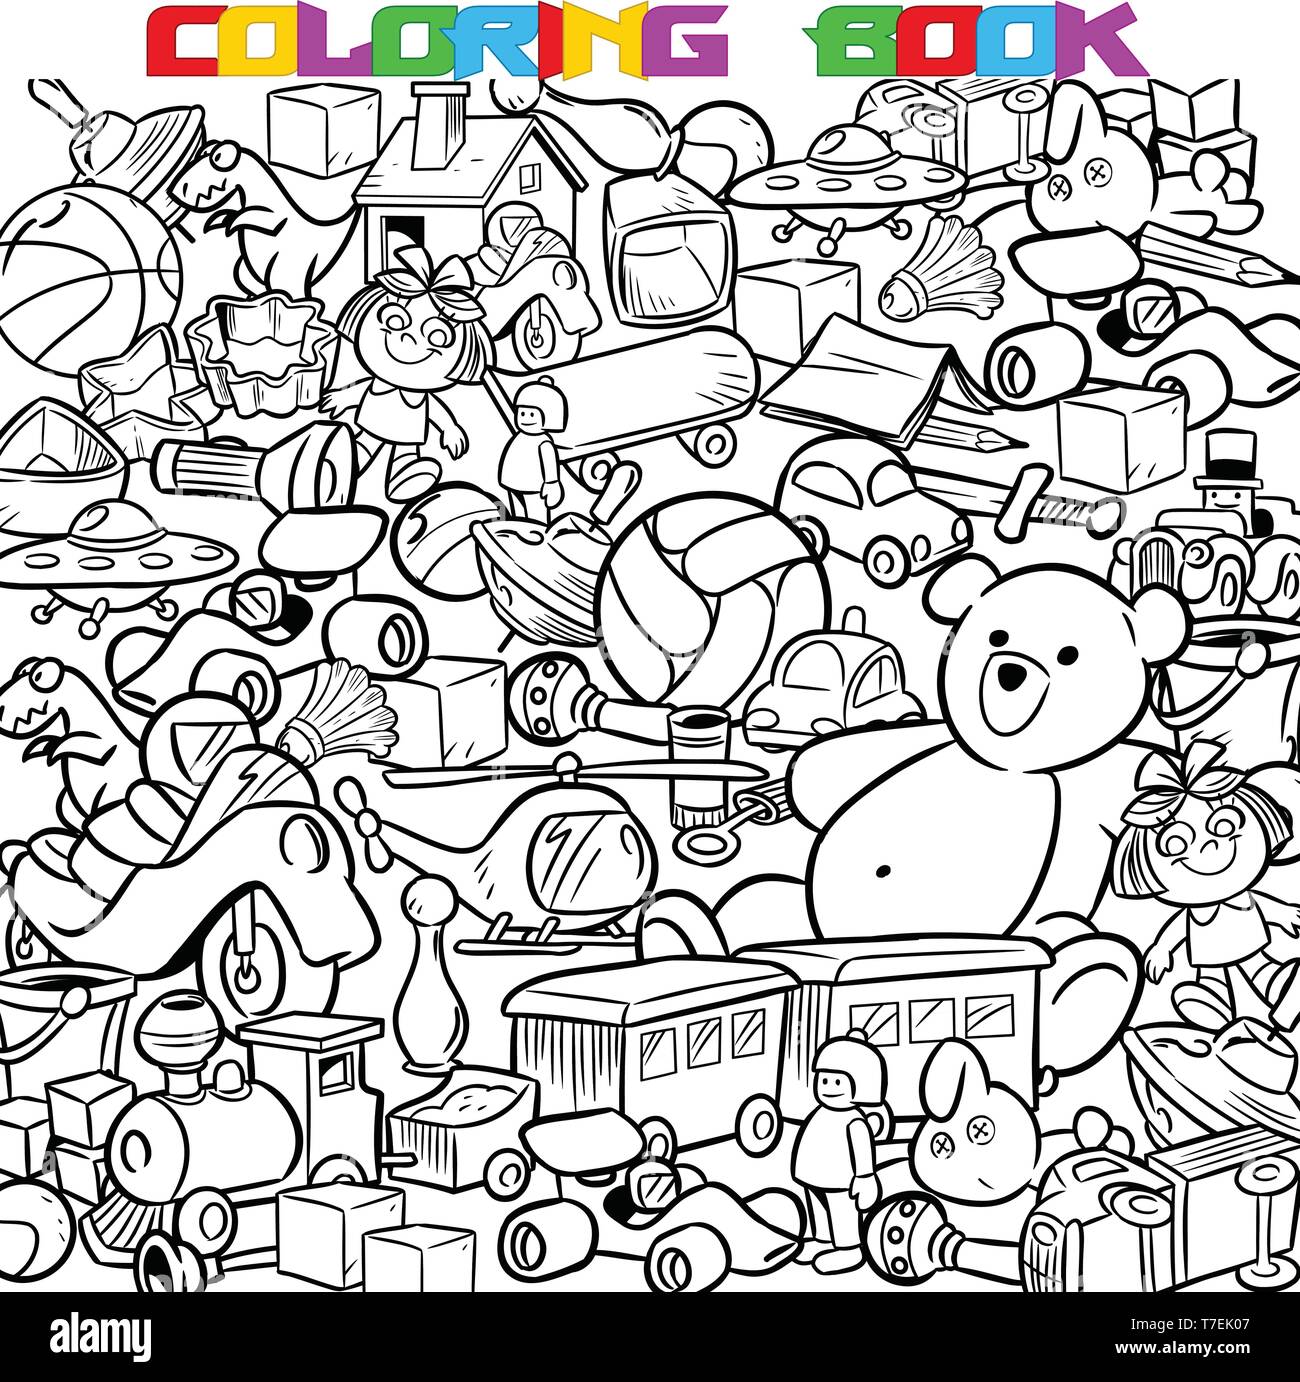 The illustration shows the big heap of colorful childrens toys. Is made a black outline for a coloring book. Stock Vector